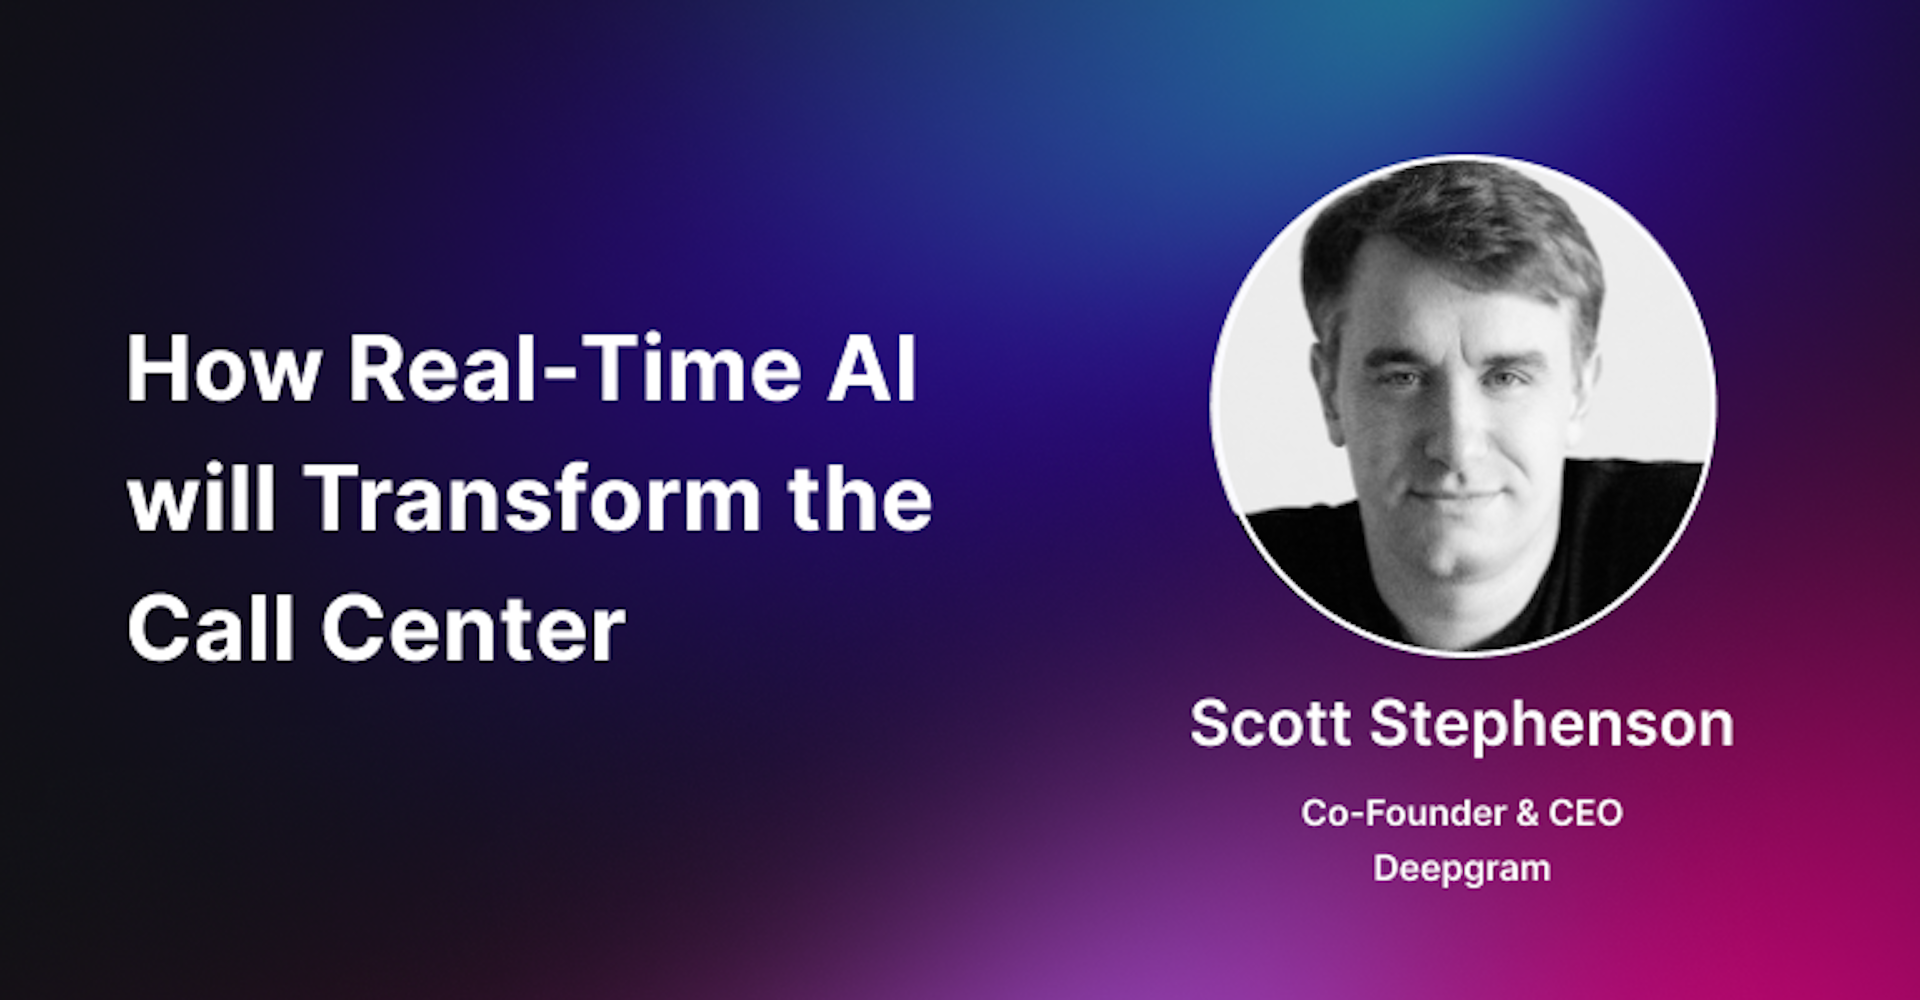 How Real-Time AI will Transform the Call Center